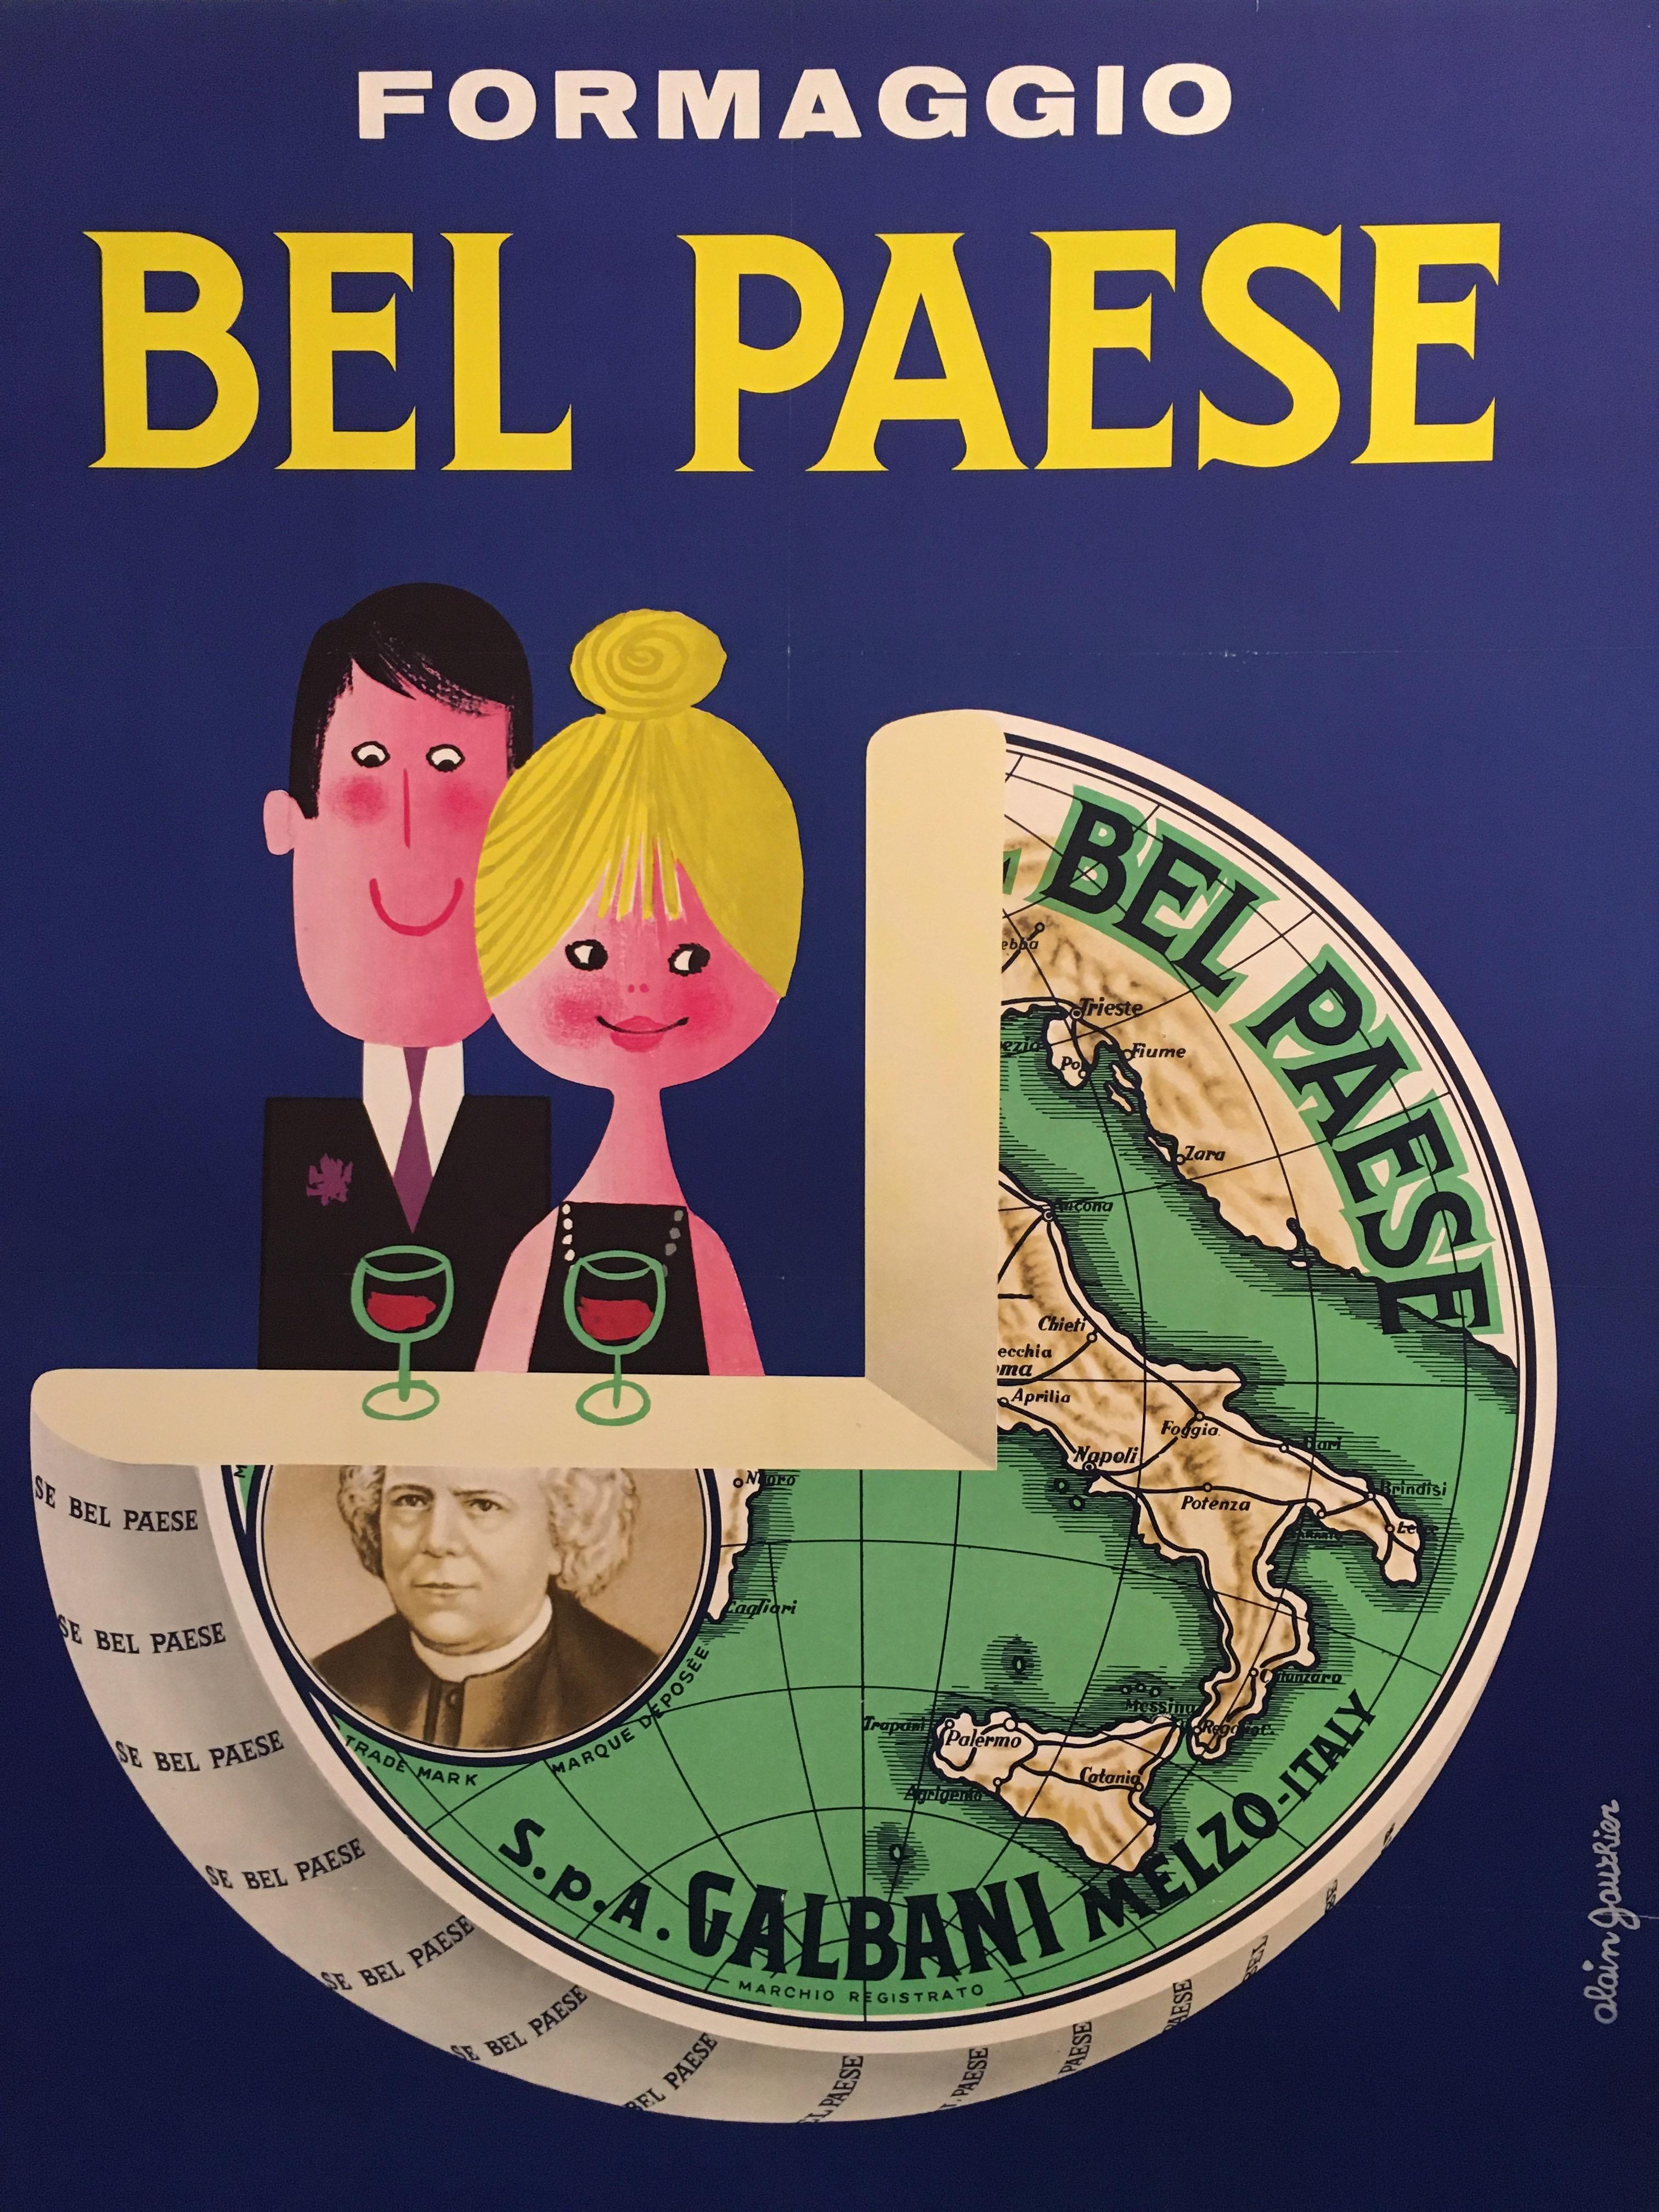 'Bel Paese Formaggio', original vintage mid-1960s poster, by Alain Gautier

Gauthier was a French illustrator, artist, and poster designer of world renown before he began illustrating books. This poster is advertising a type of cheese.